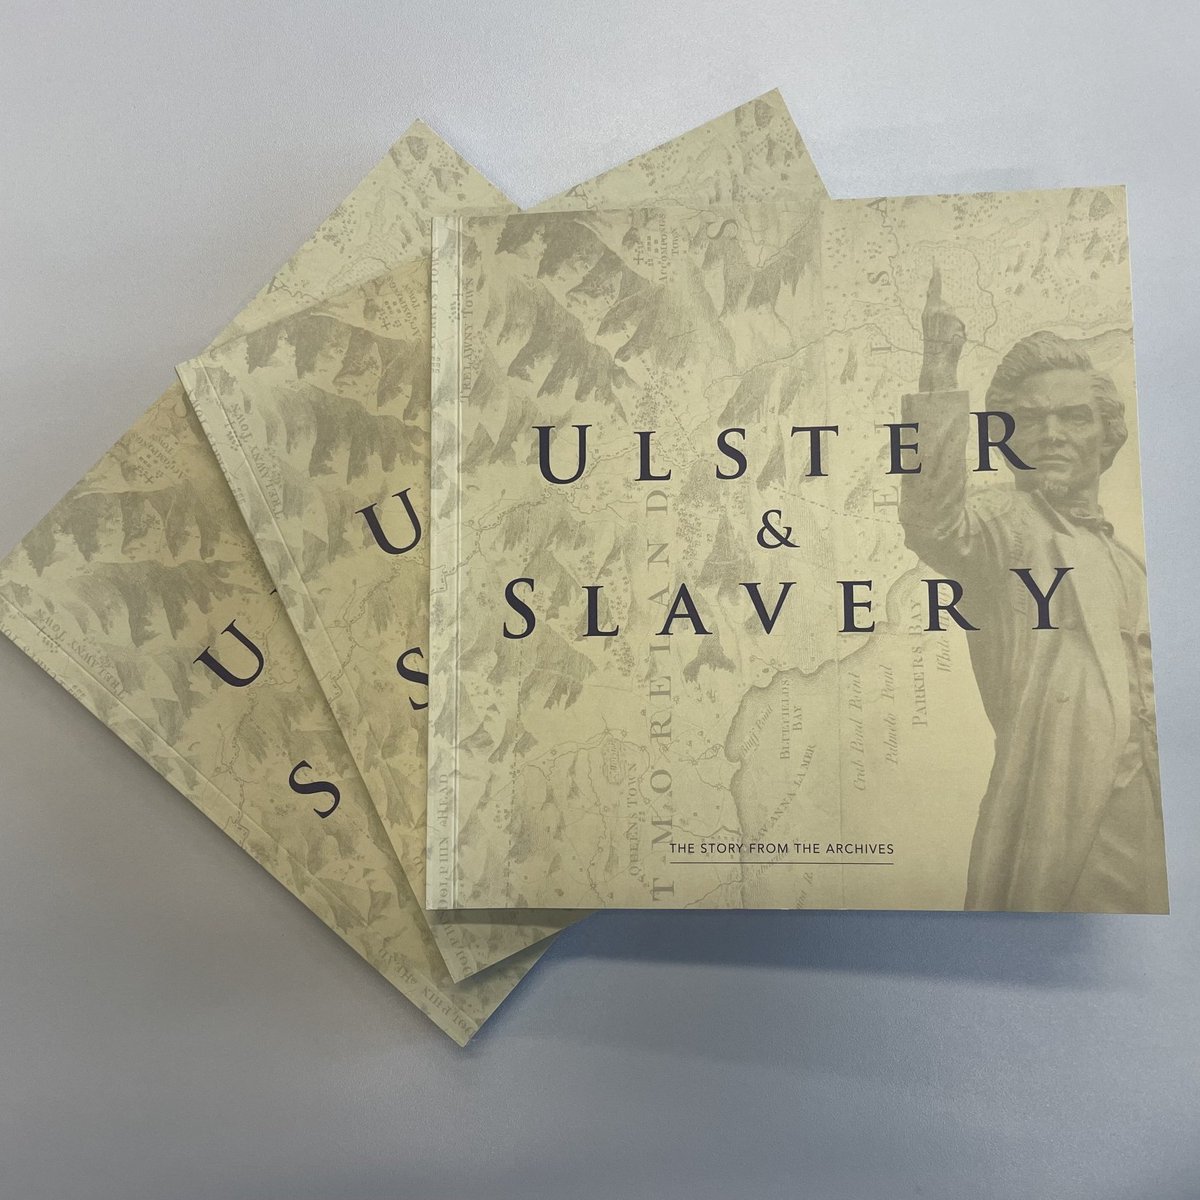 Last week we launched “Ulster & Slavery: The Story from the Archives”. This updated PRONI guide to archival sources is an essential resource for reflecting on slavery in the past and its influence on the present day. Please see the link to discover more: nidirect.gov.uk/articles/ulste…